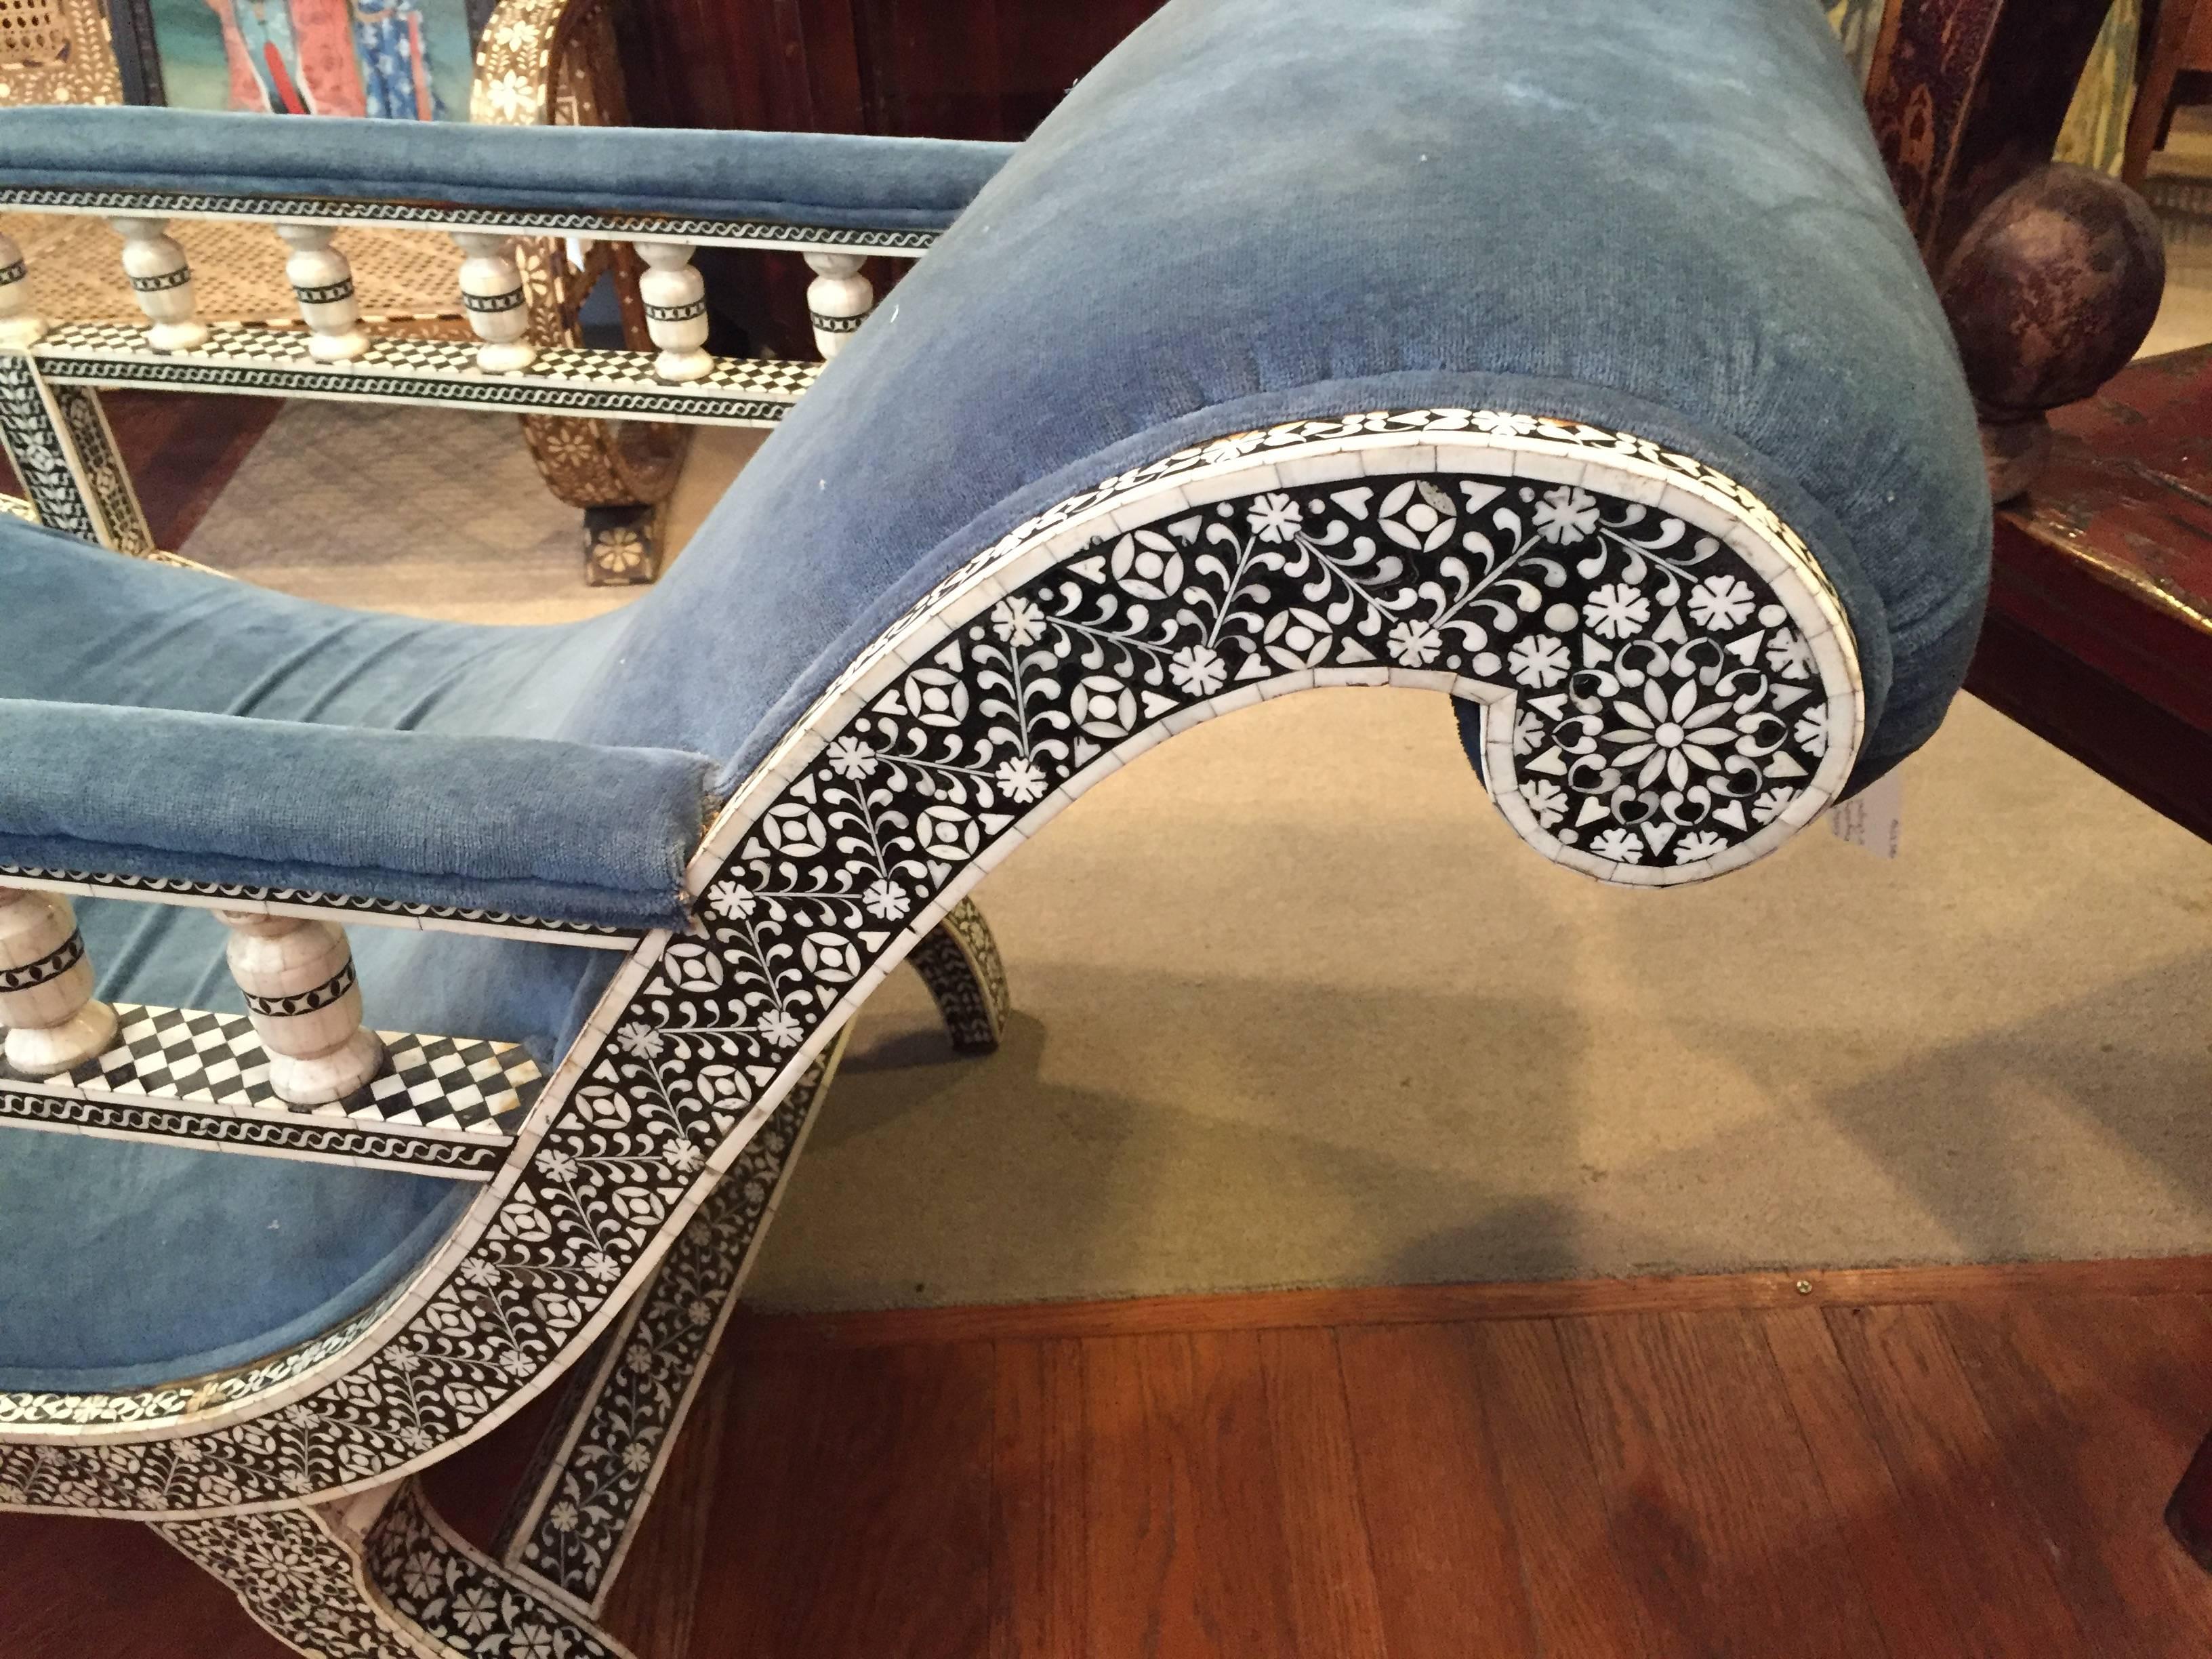 Late 19th century, Anglo-Indian horn and bone inlaid velvet covered chaise longue.